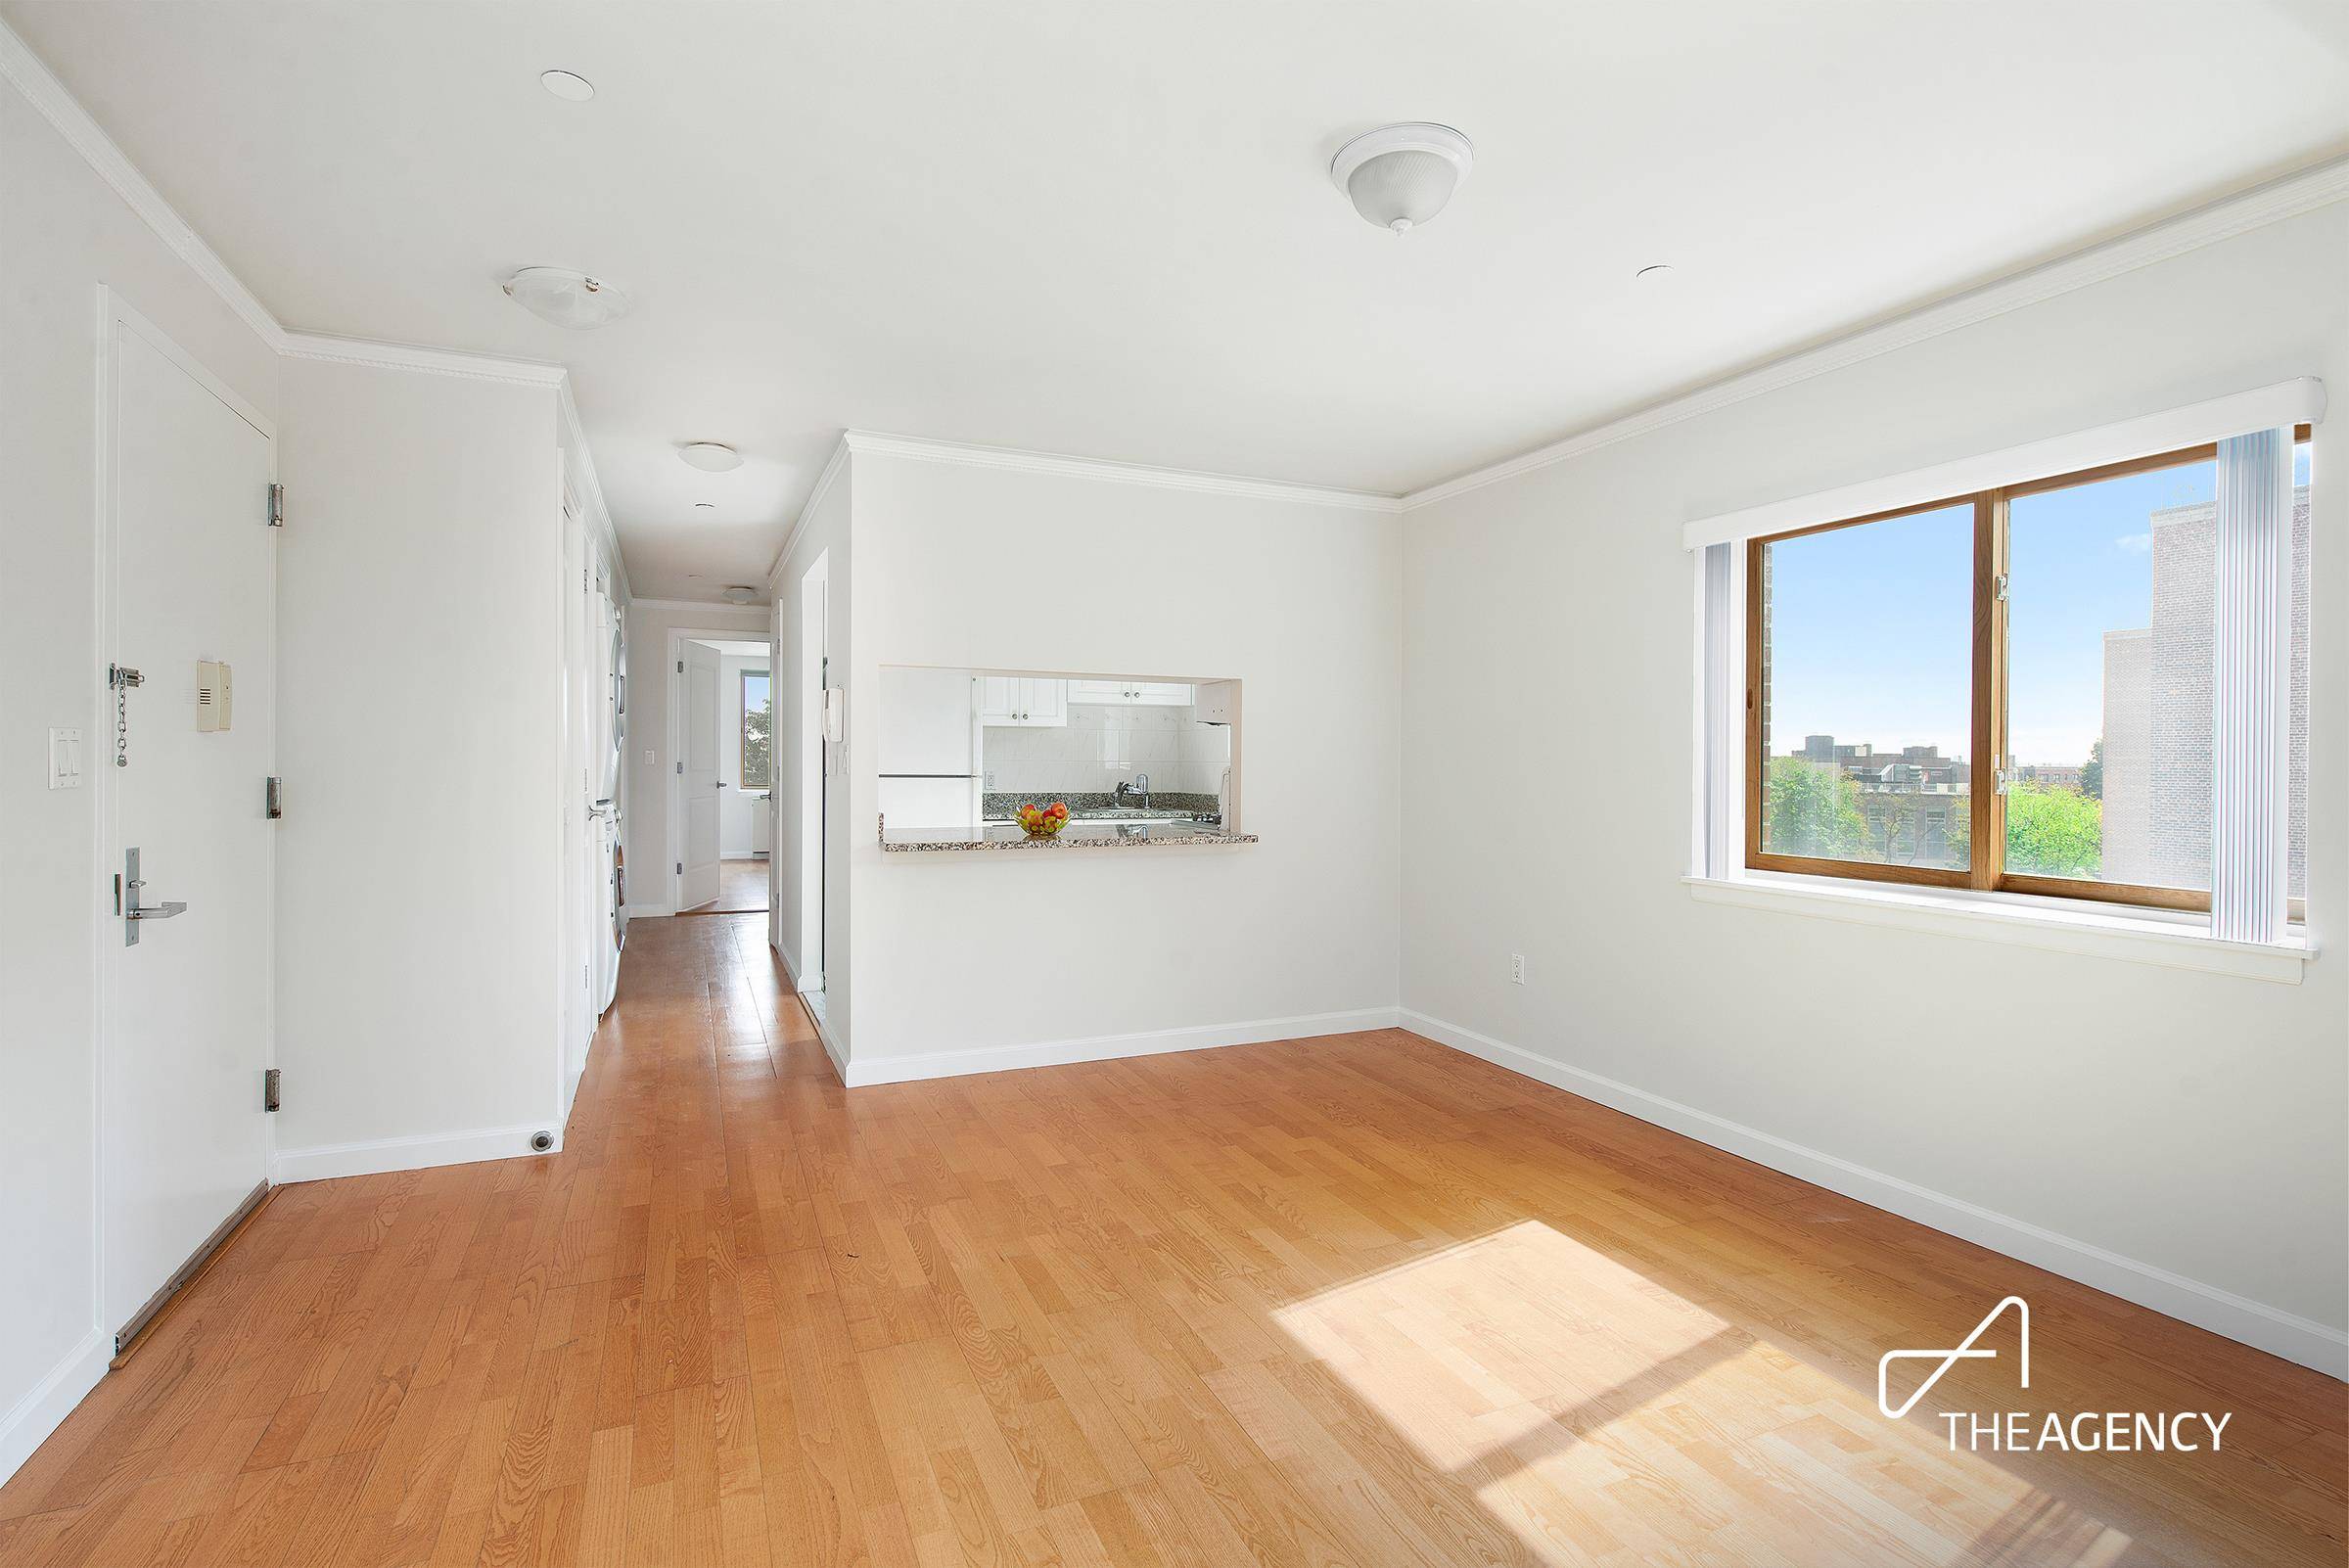 Let the sun shine in ! Cheerful and sunny 3 bedroom, 2 bath home offers parking spot, washer dryer, storage and balcony in a quiet, boutique condo building.